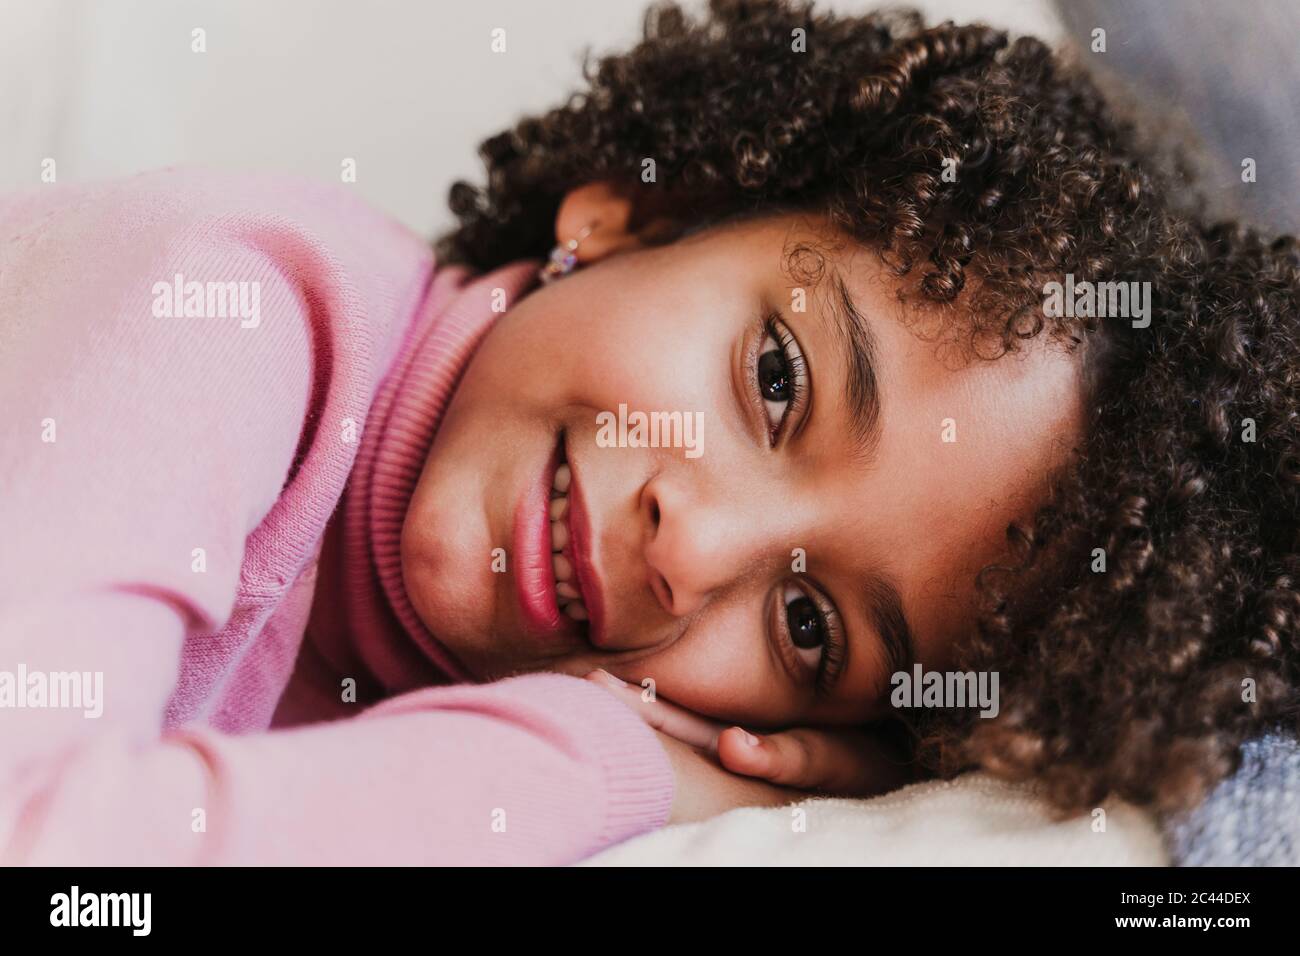 Portrait of smiling little girl wearing pink turtleneck pullover lying on couch Stock Photo